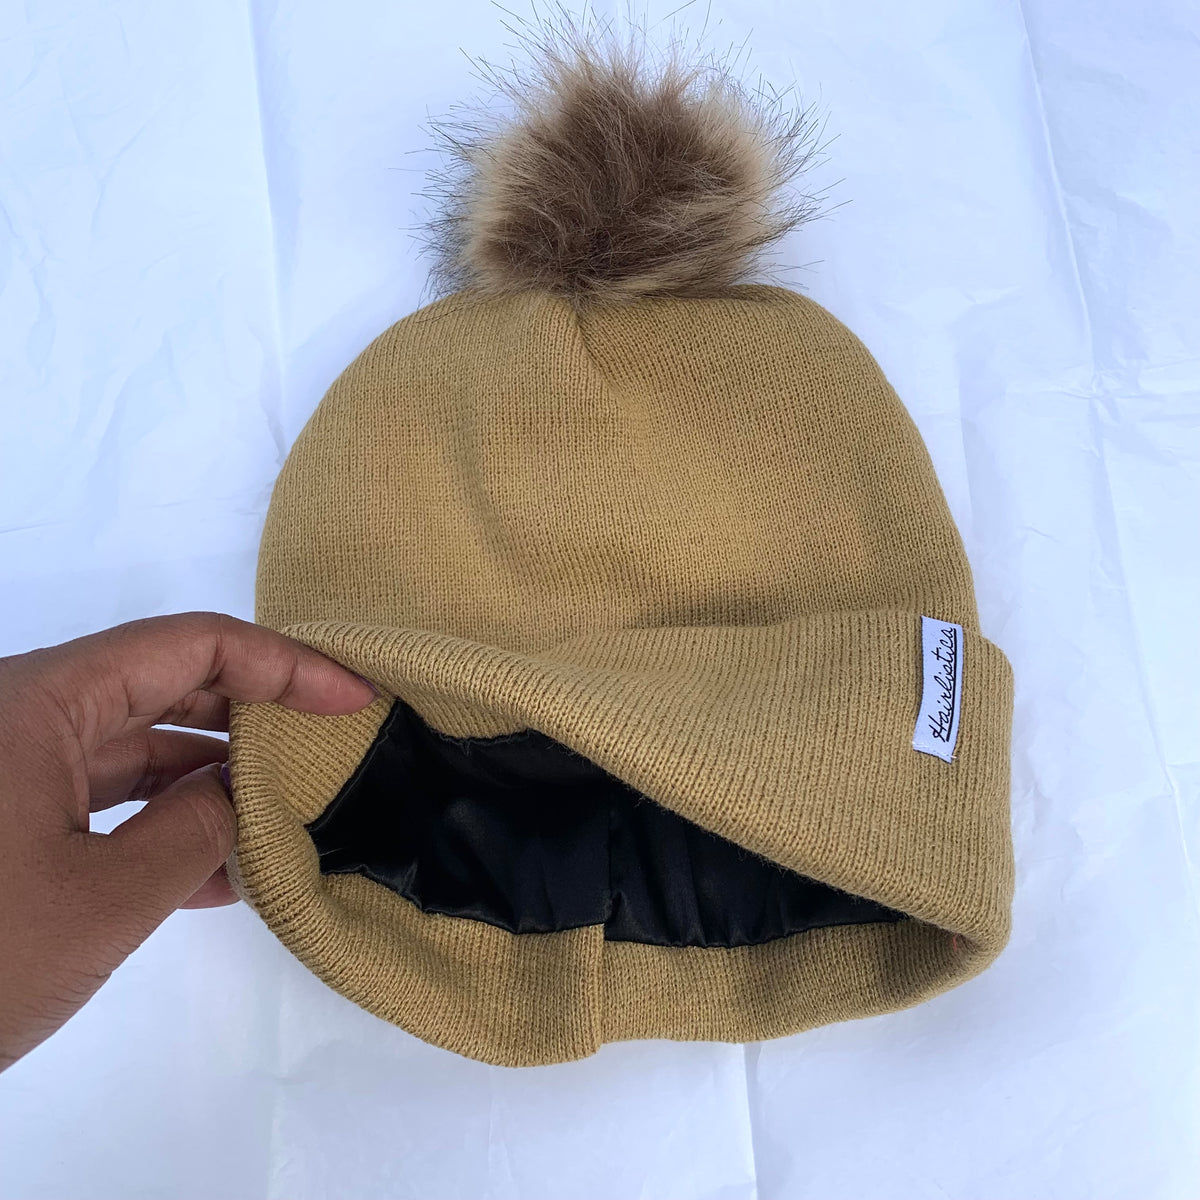 beanie Pompom Hairlistica - Beige lined with – Satin